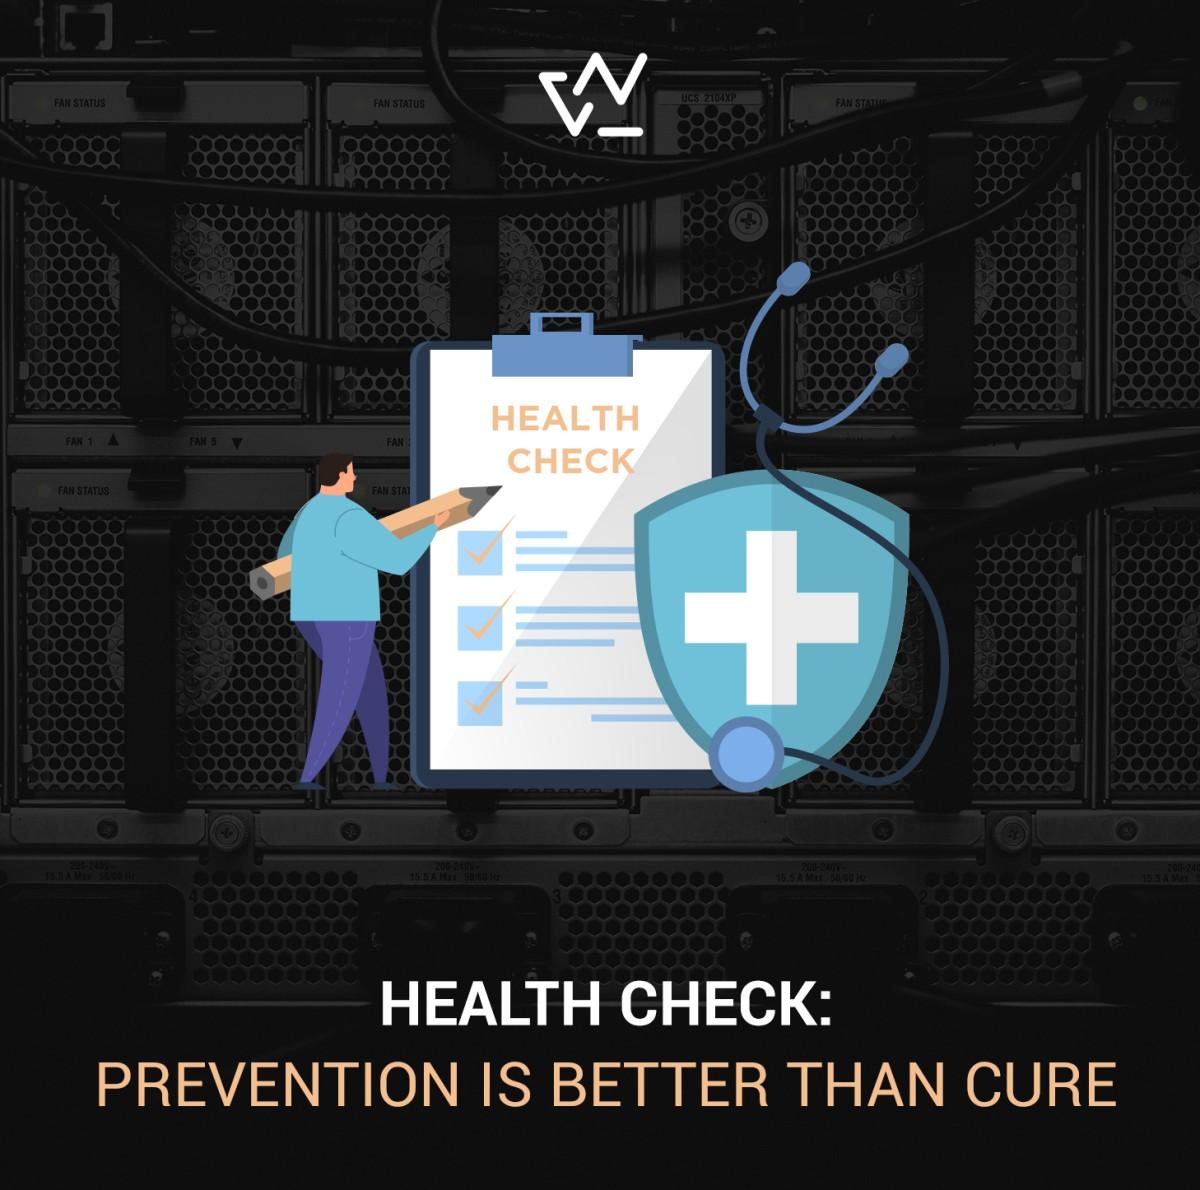 HEALTH CHECK: PREVENTION IS BETTER THAN CURE, ALSO FOR YOUR IT ENVIRONMENT